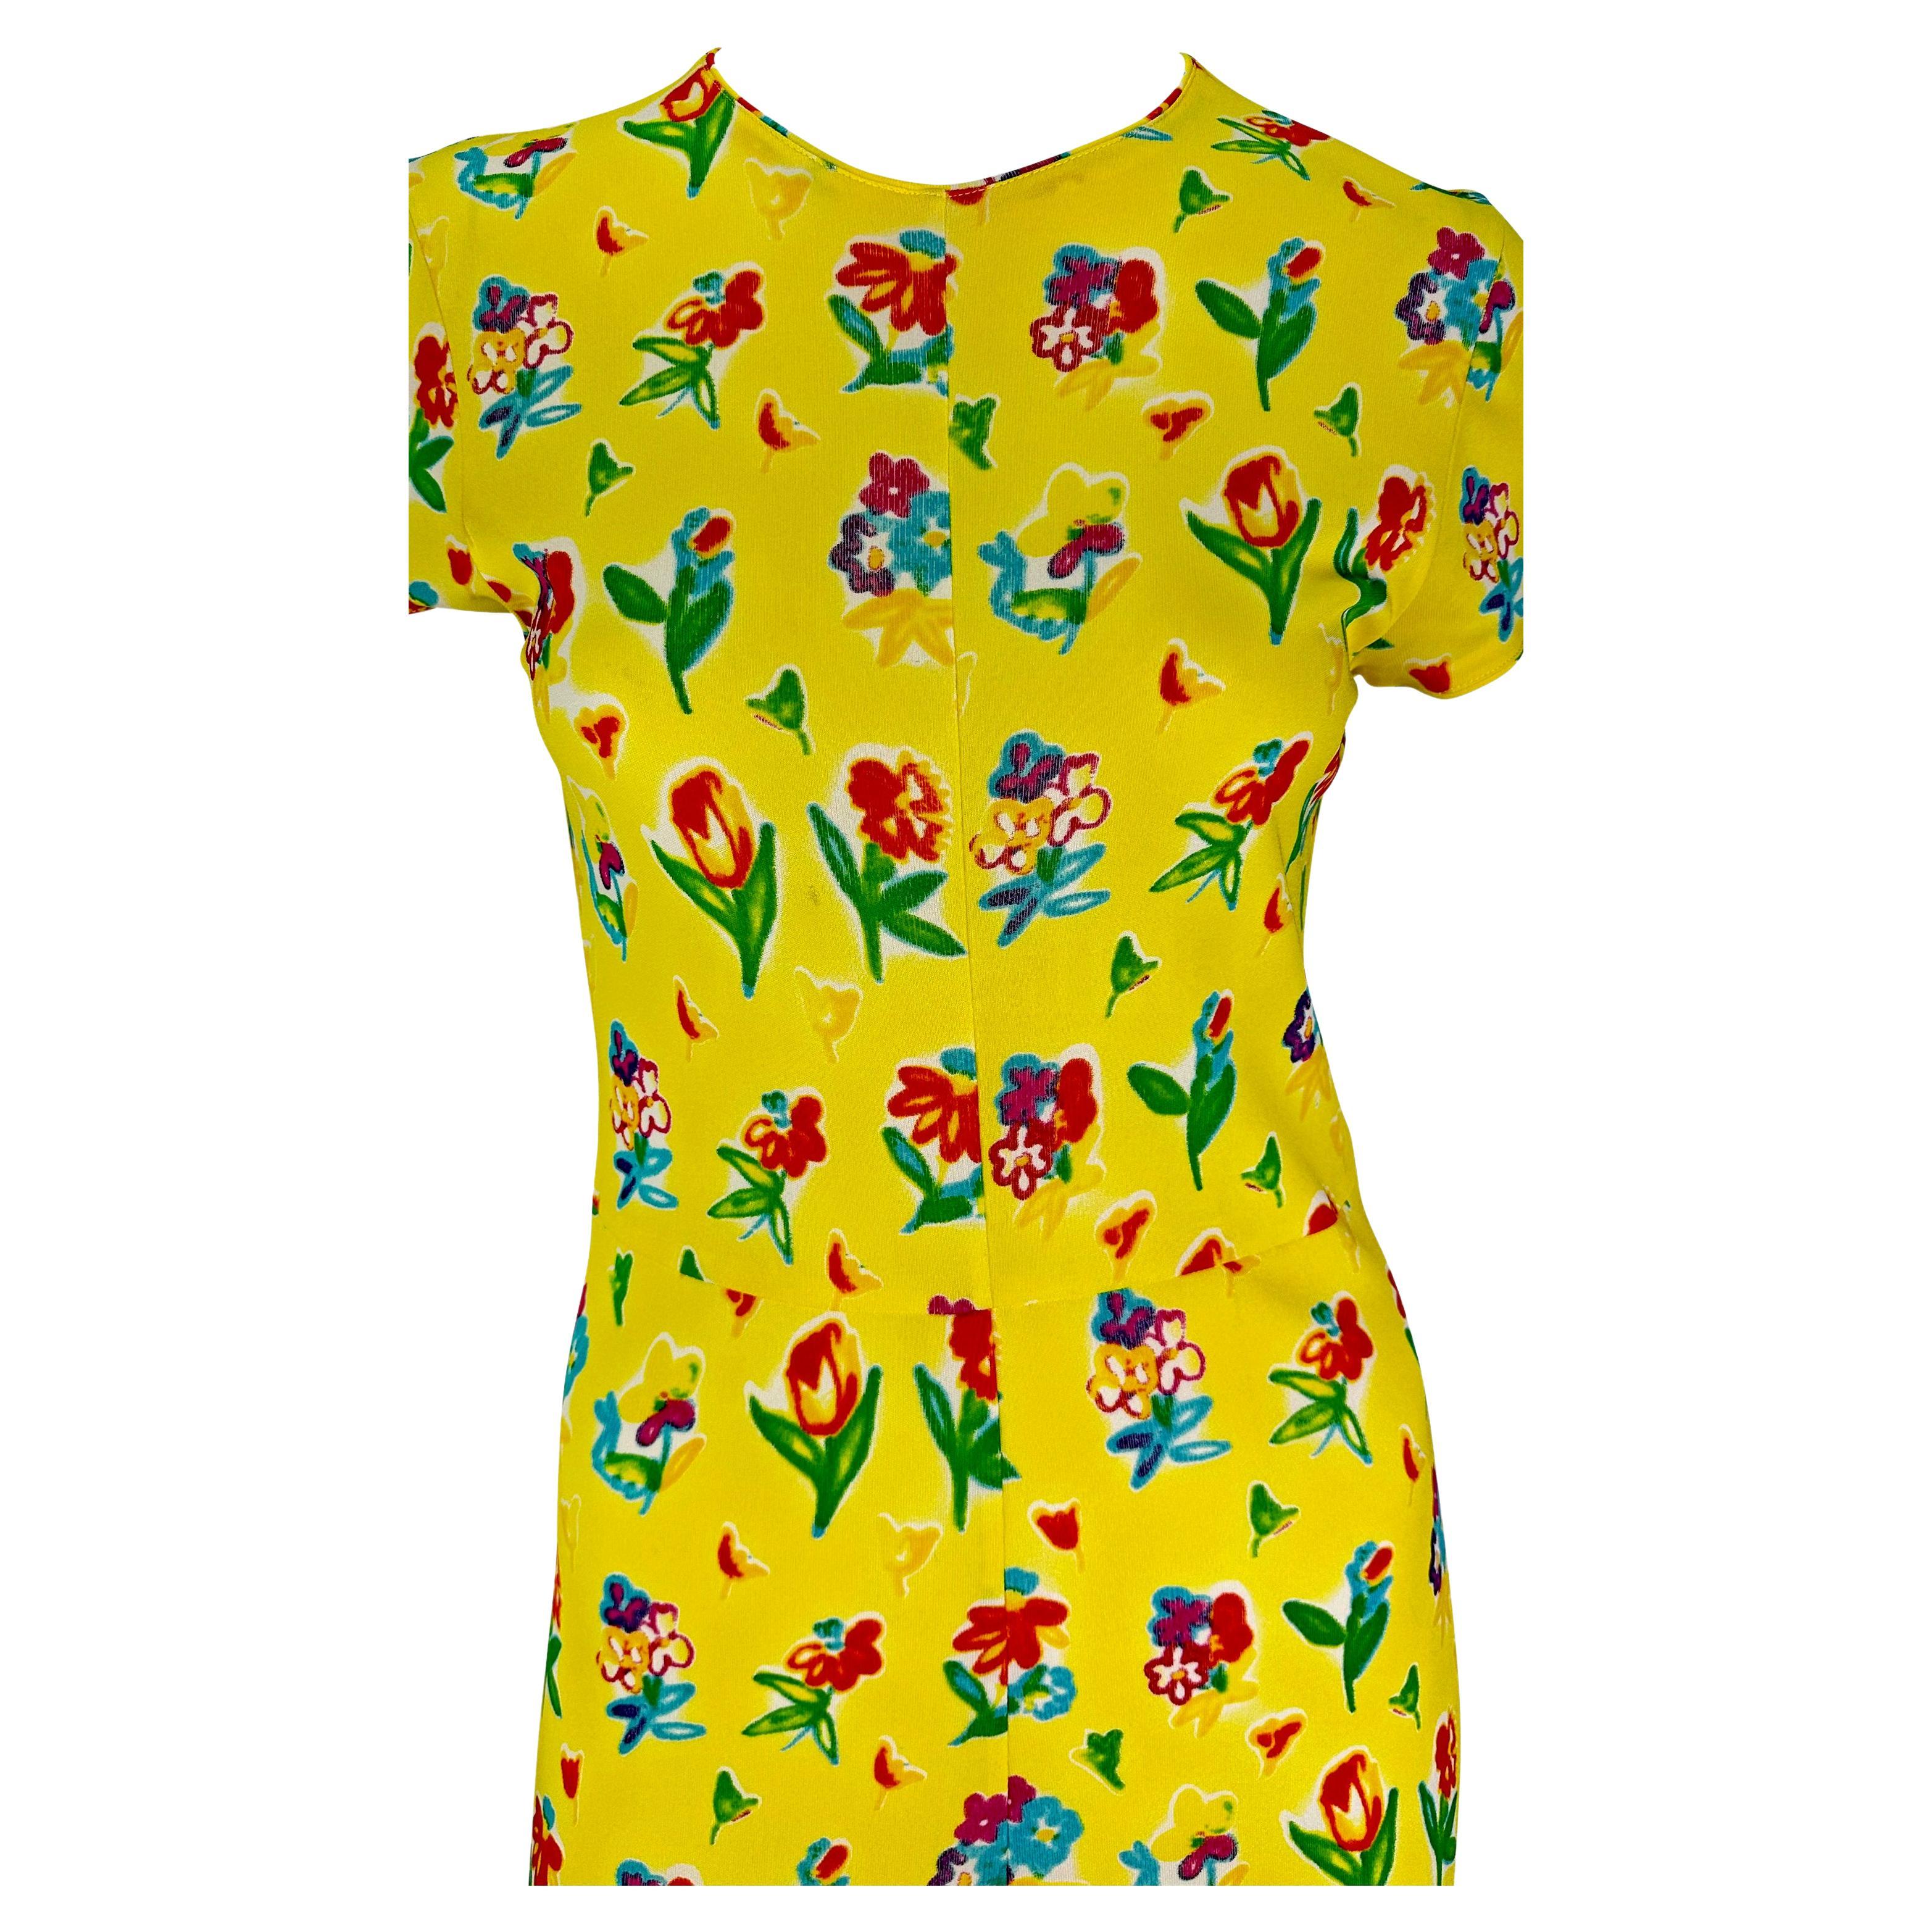 Presenting a beautiful yellow floral Gianni Versace midi dress, designed by Gianni Versace. From the Spring/Summer 1996 collection, this girly yellow dress is covered in a colorful spray paint floral pattern. The dress is made complete with a crew